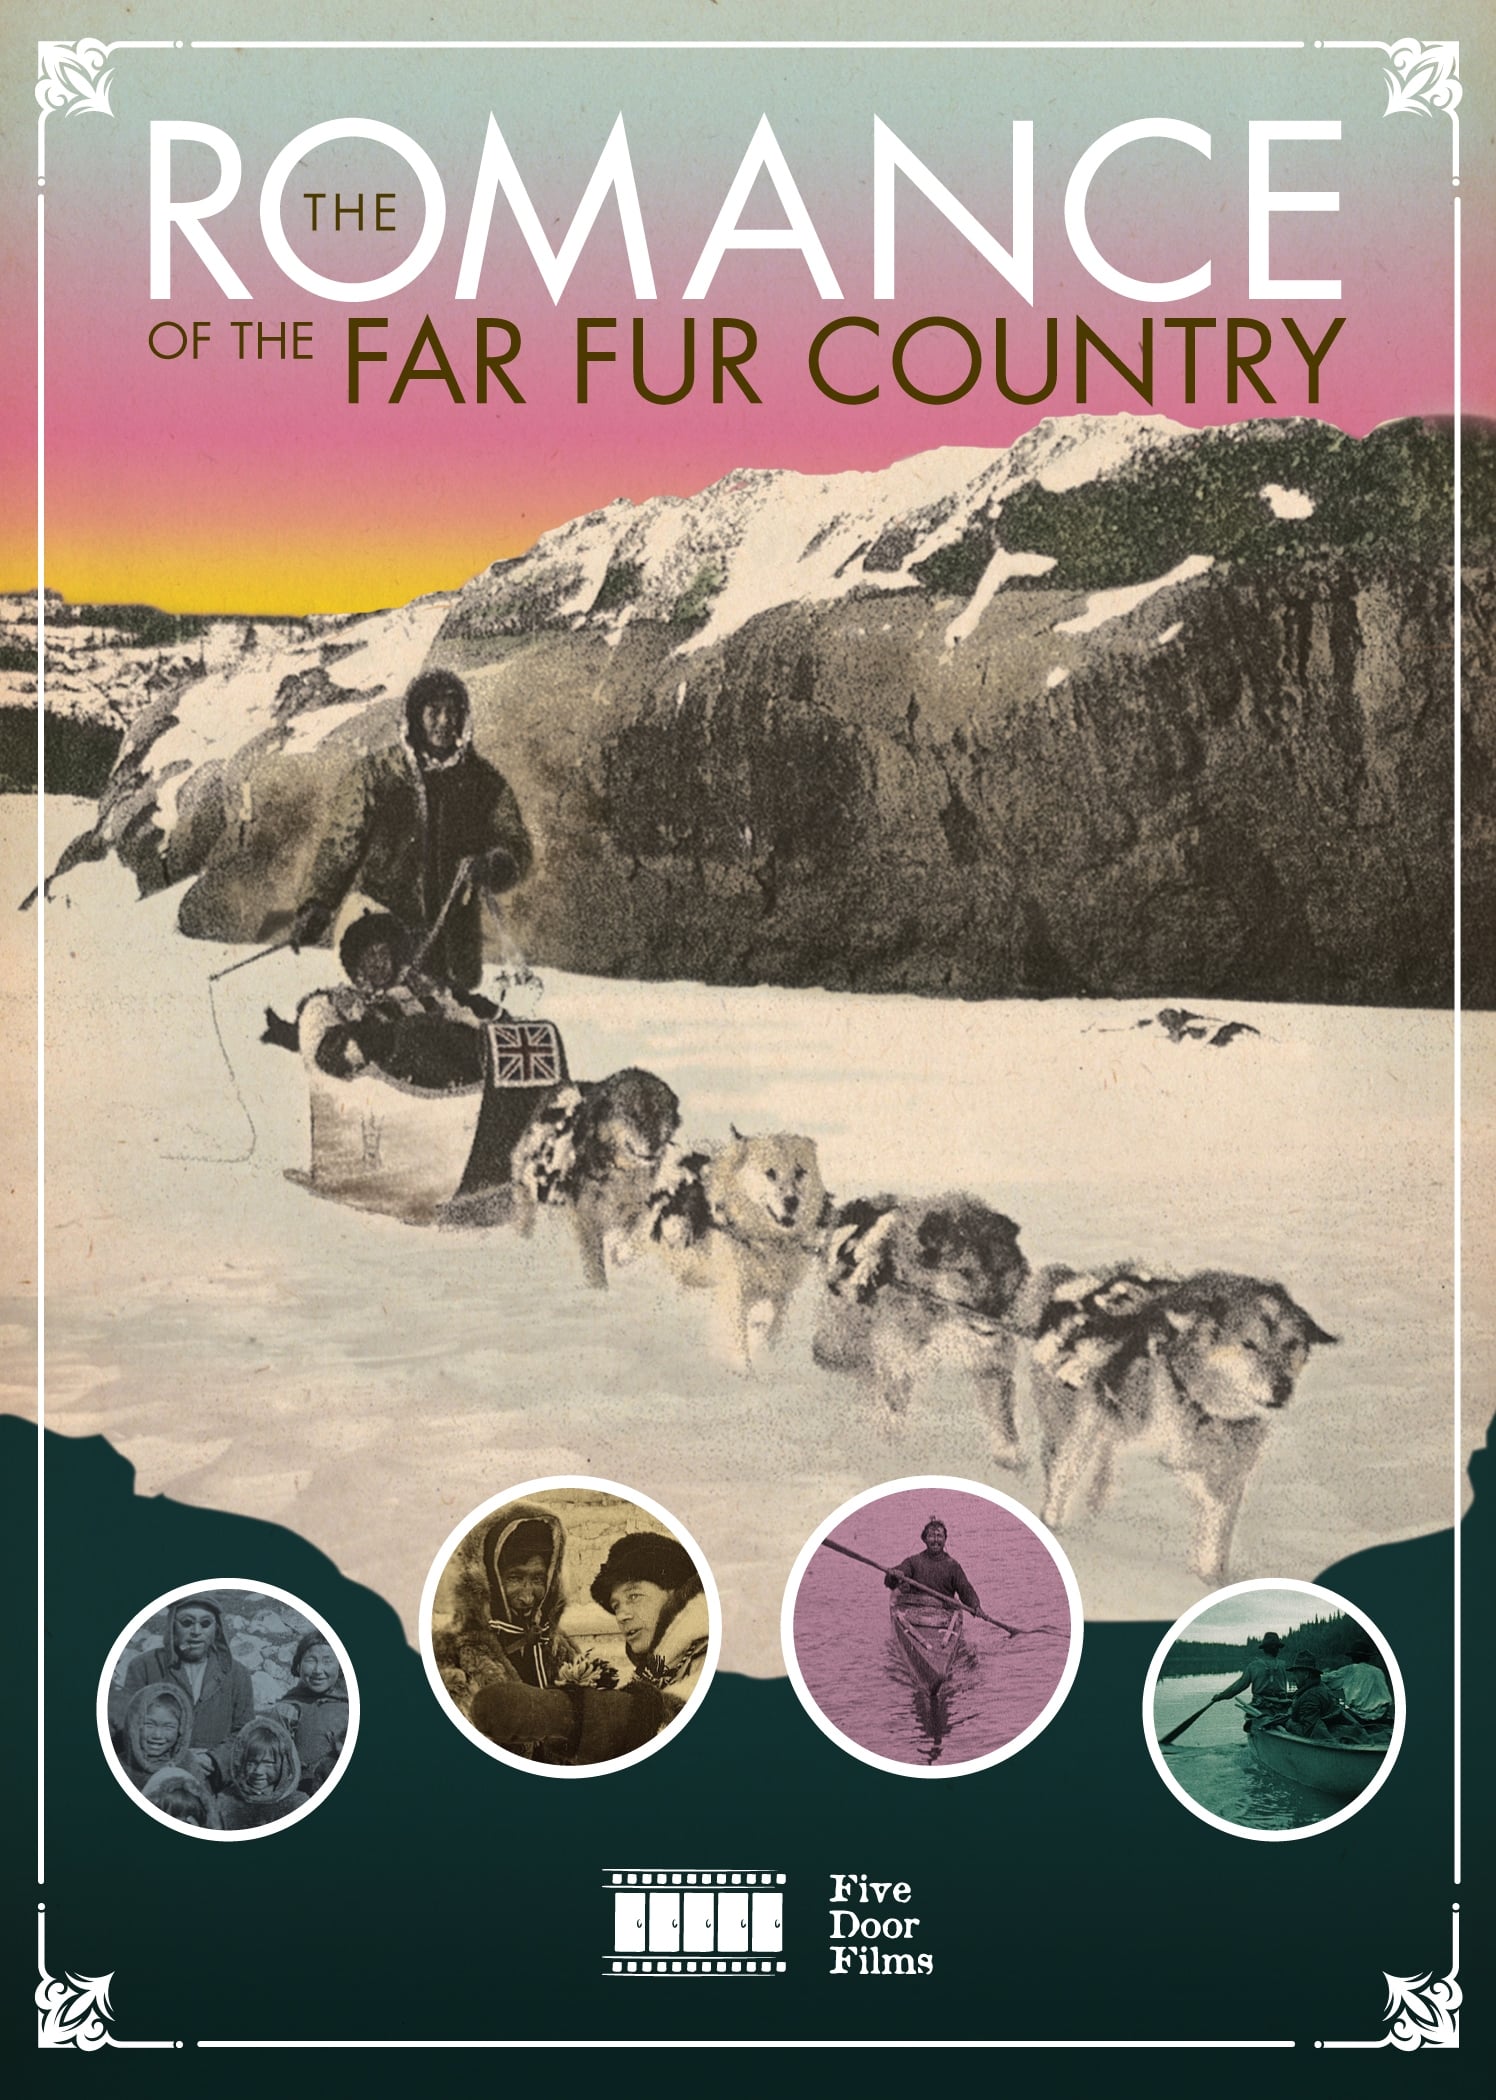 The Romance of the Far Fur Country